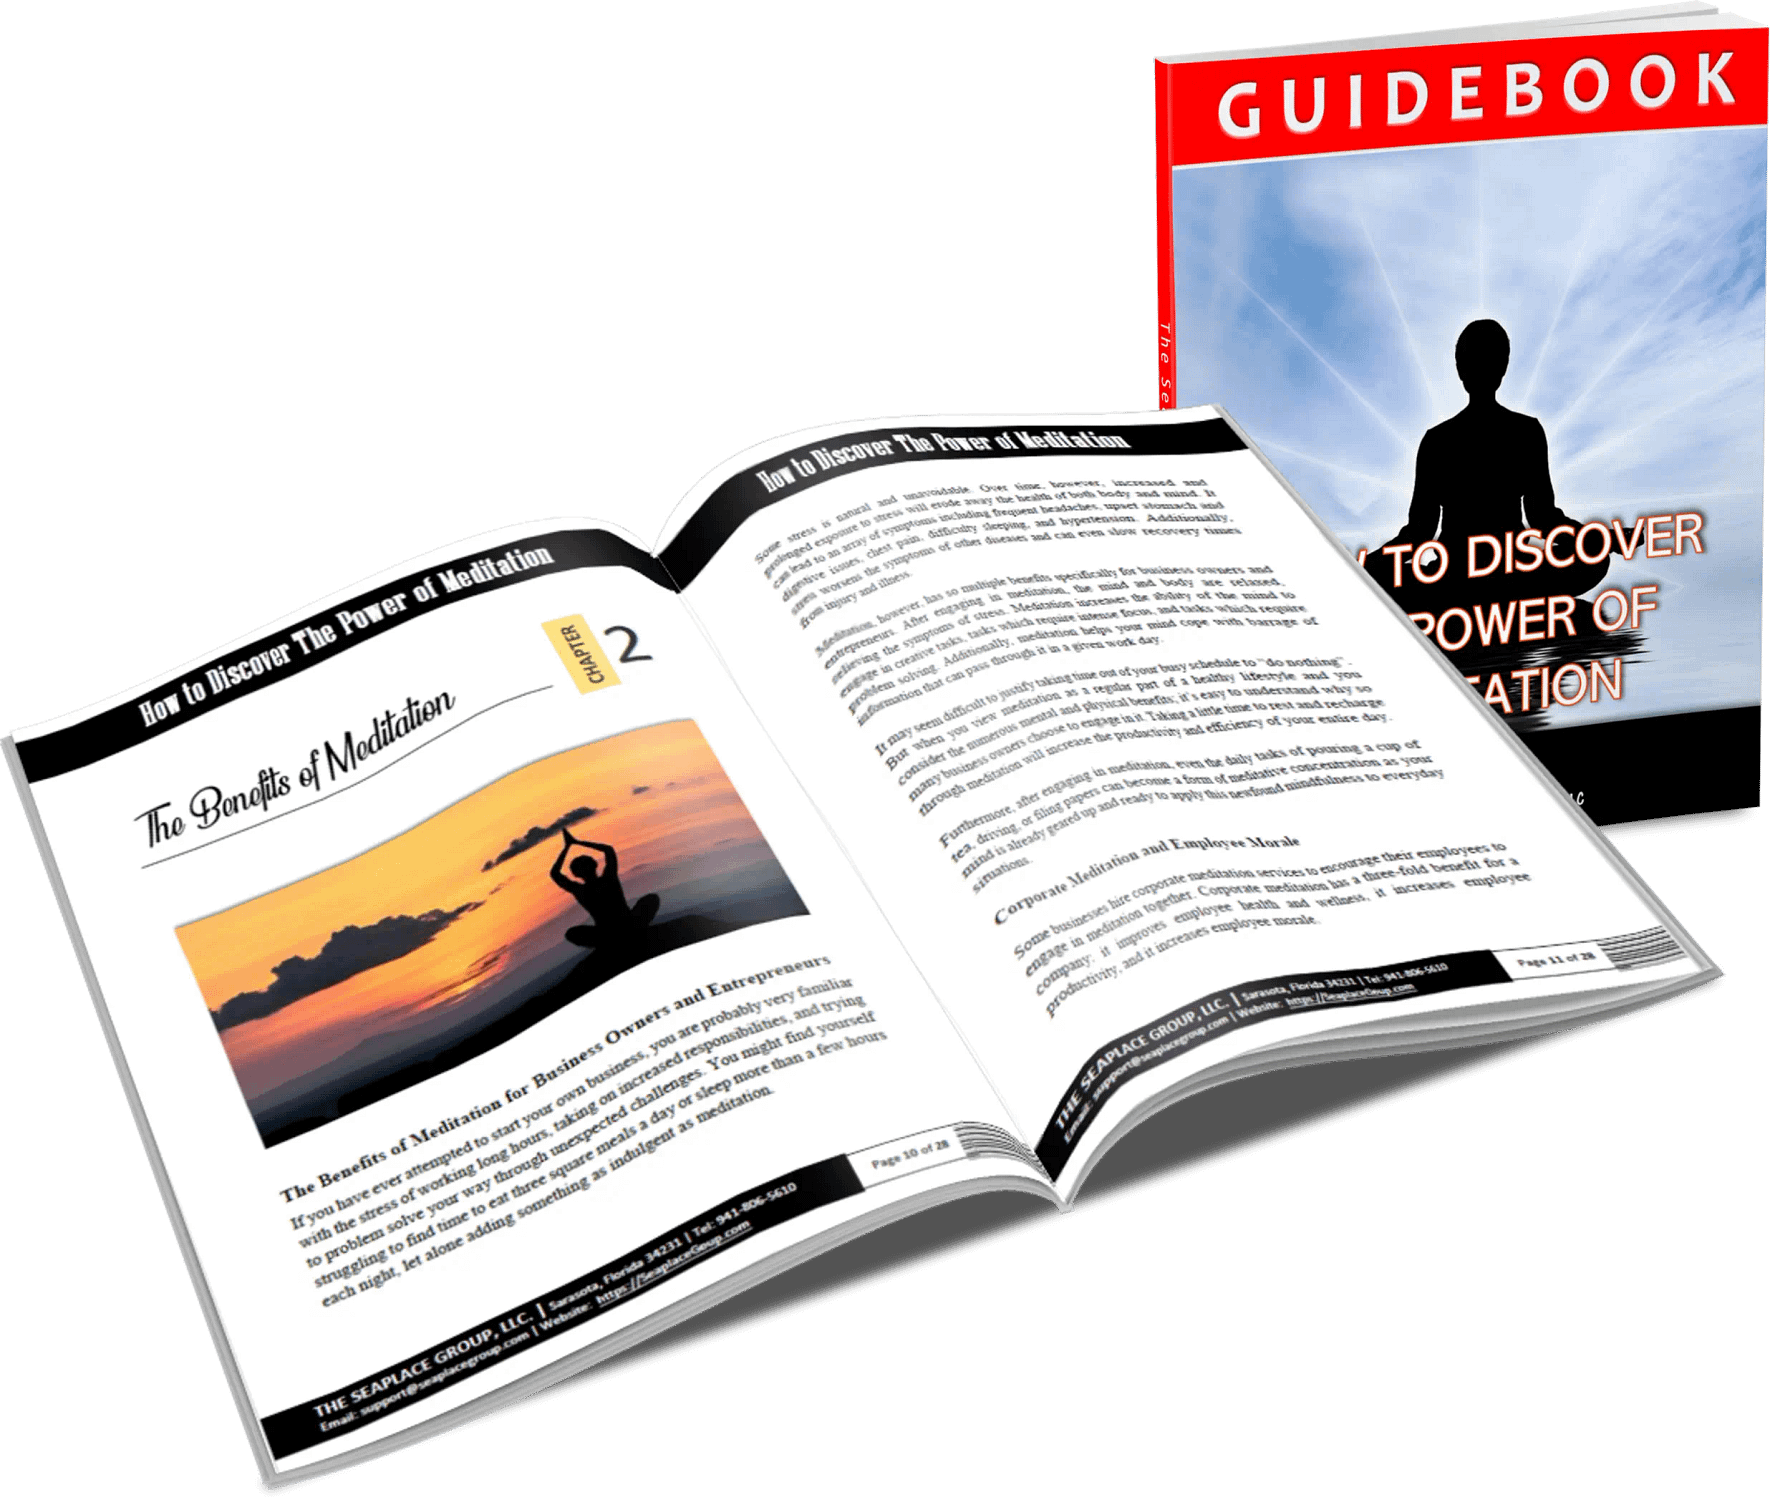 Guidebook-How to Discover the Power of Meditation BusinessGuru-TerryHHill.com